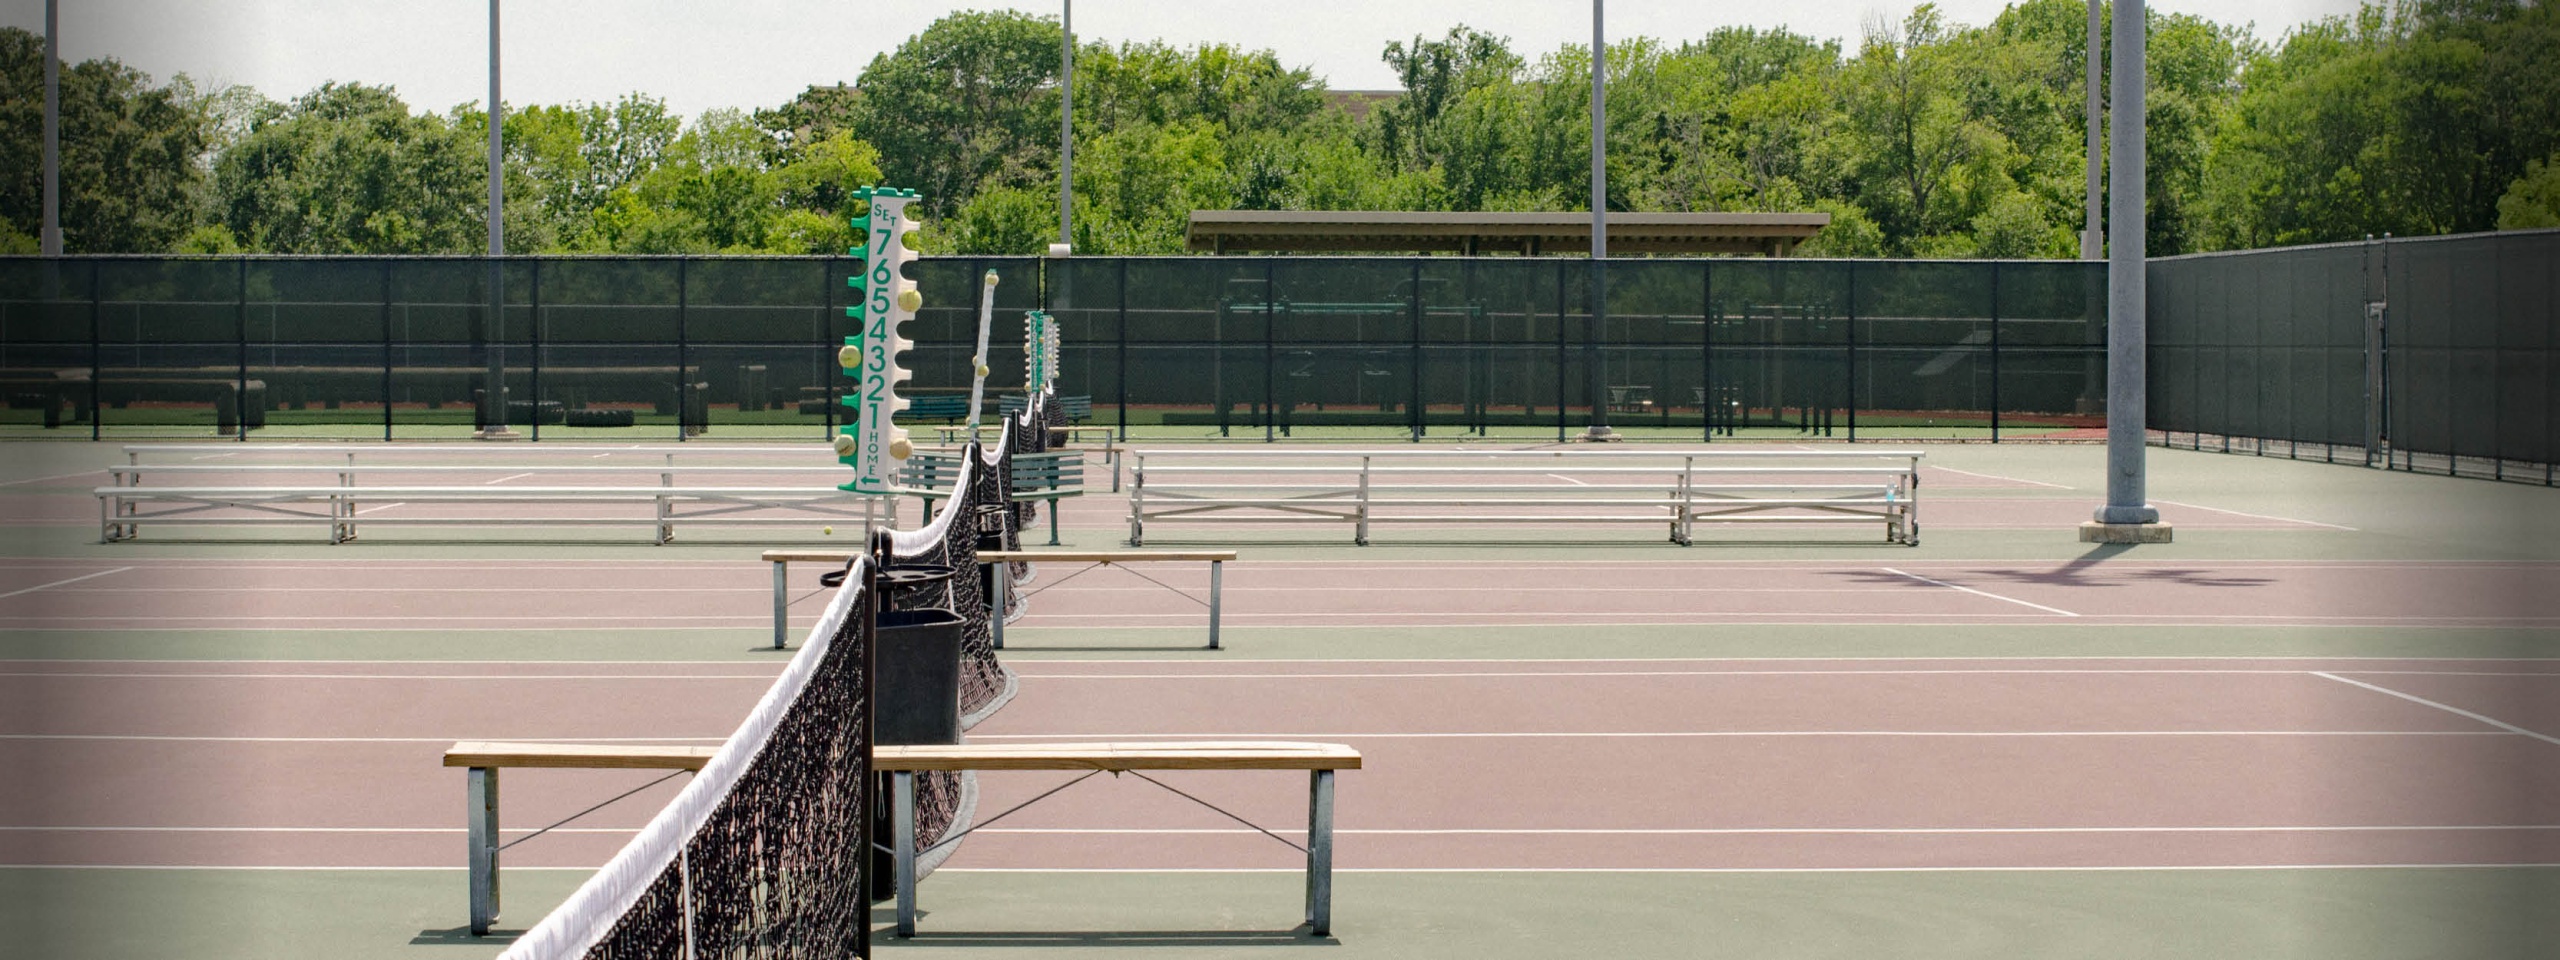 Outdoor tennis court with seating and net.